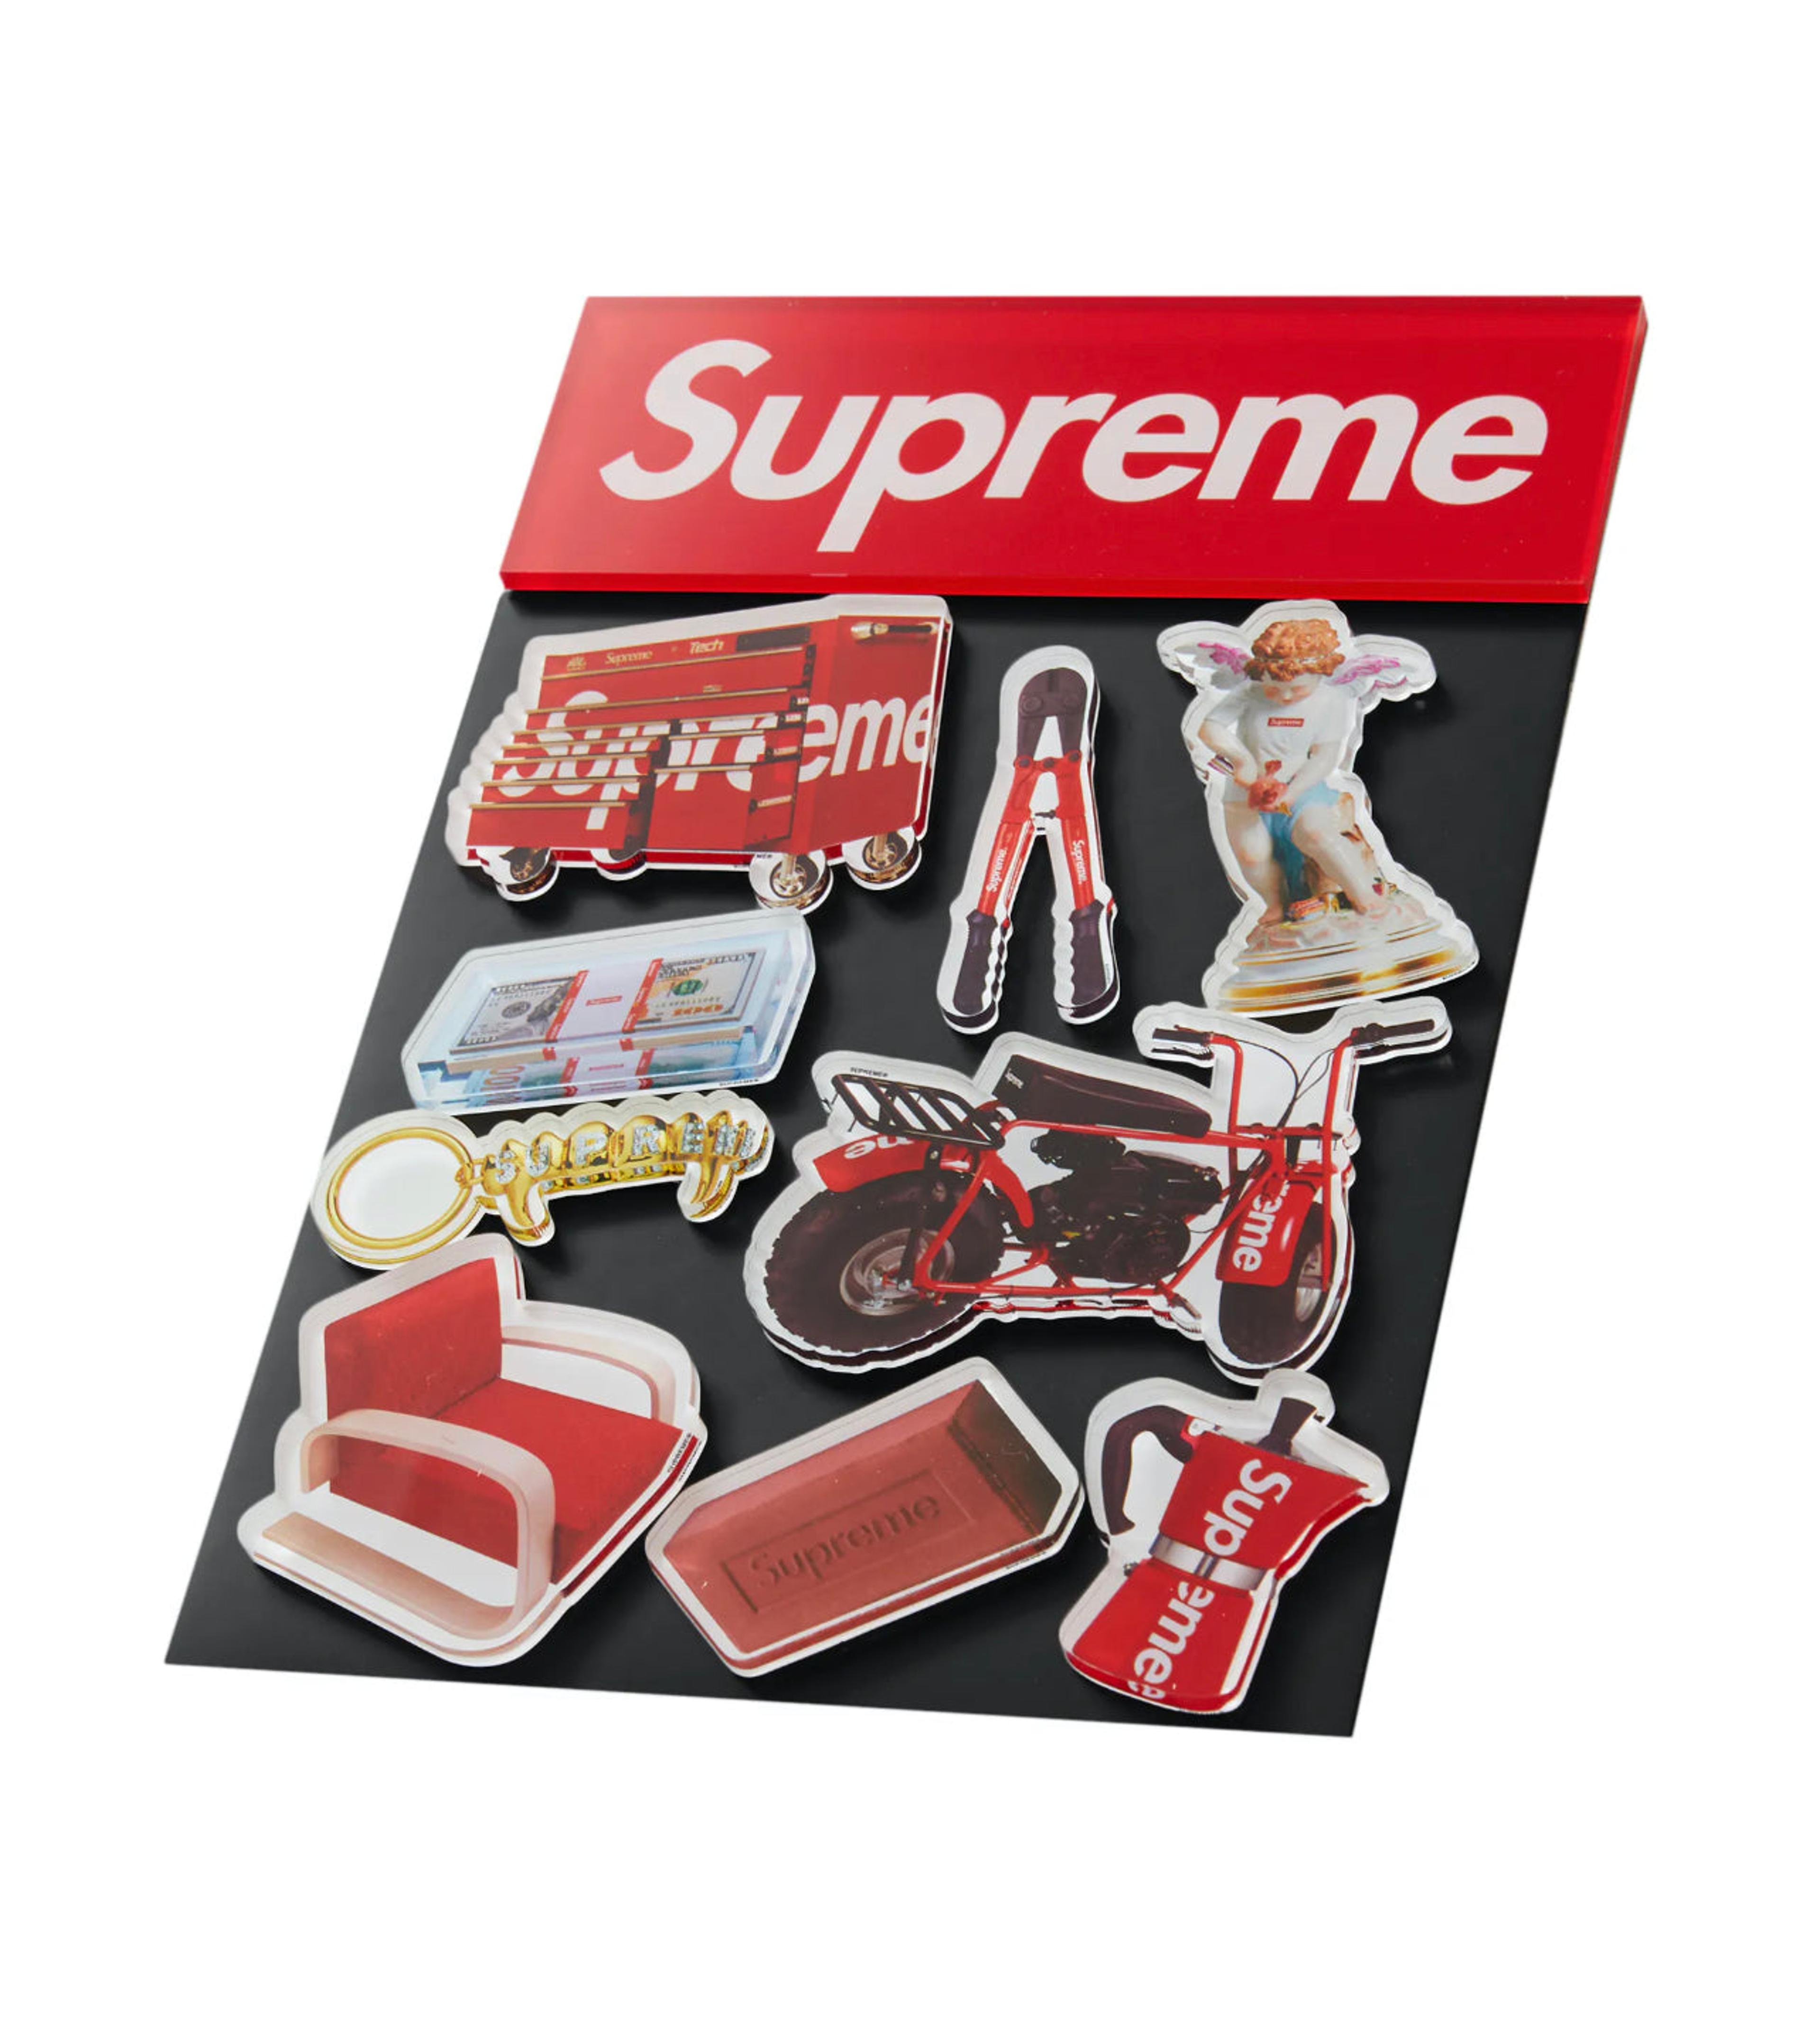 Alternate View 1 of Supreme Magnets